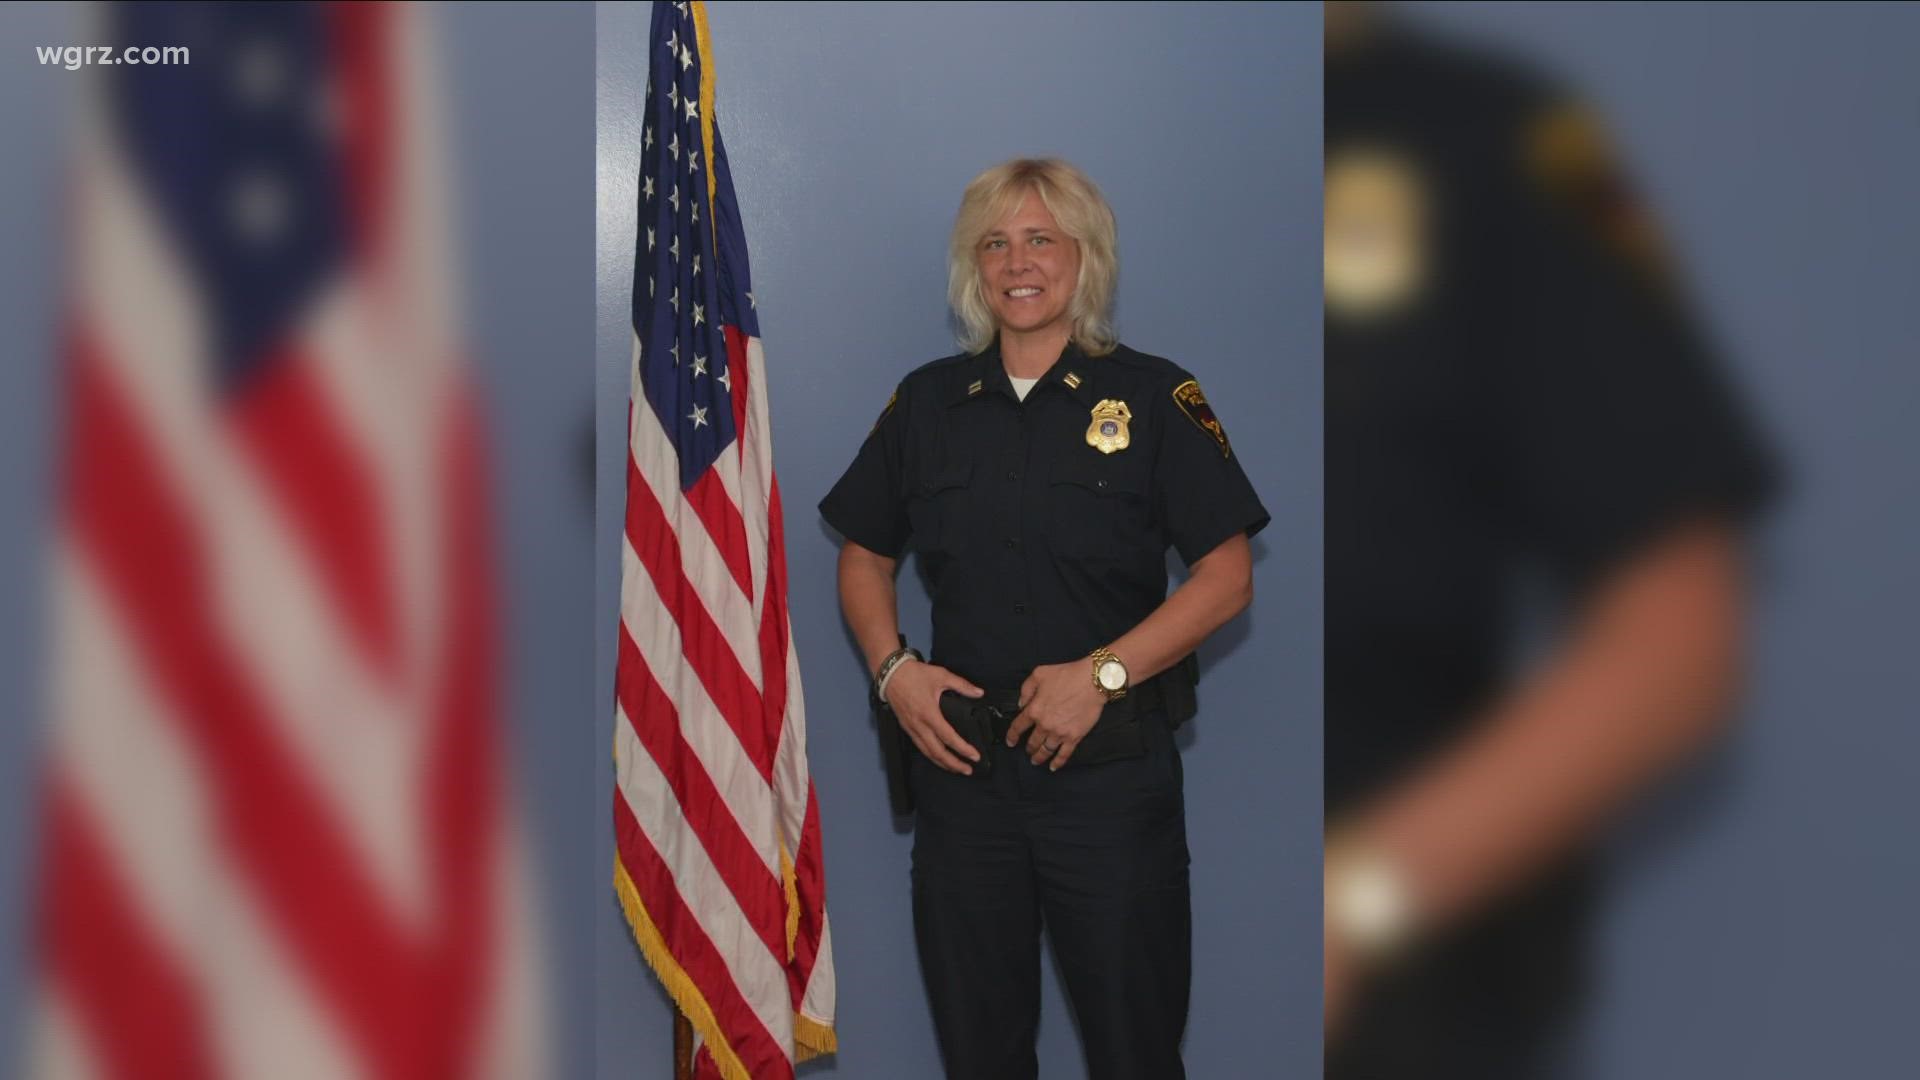 Amherst police welcome 1st female captain